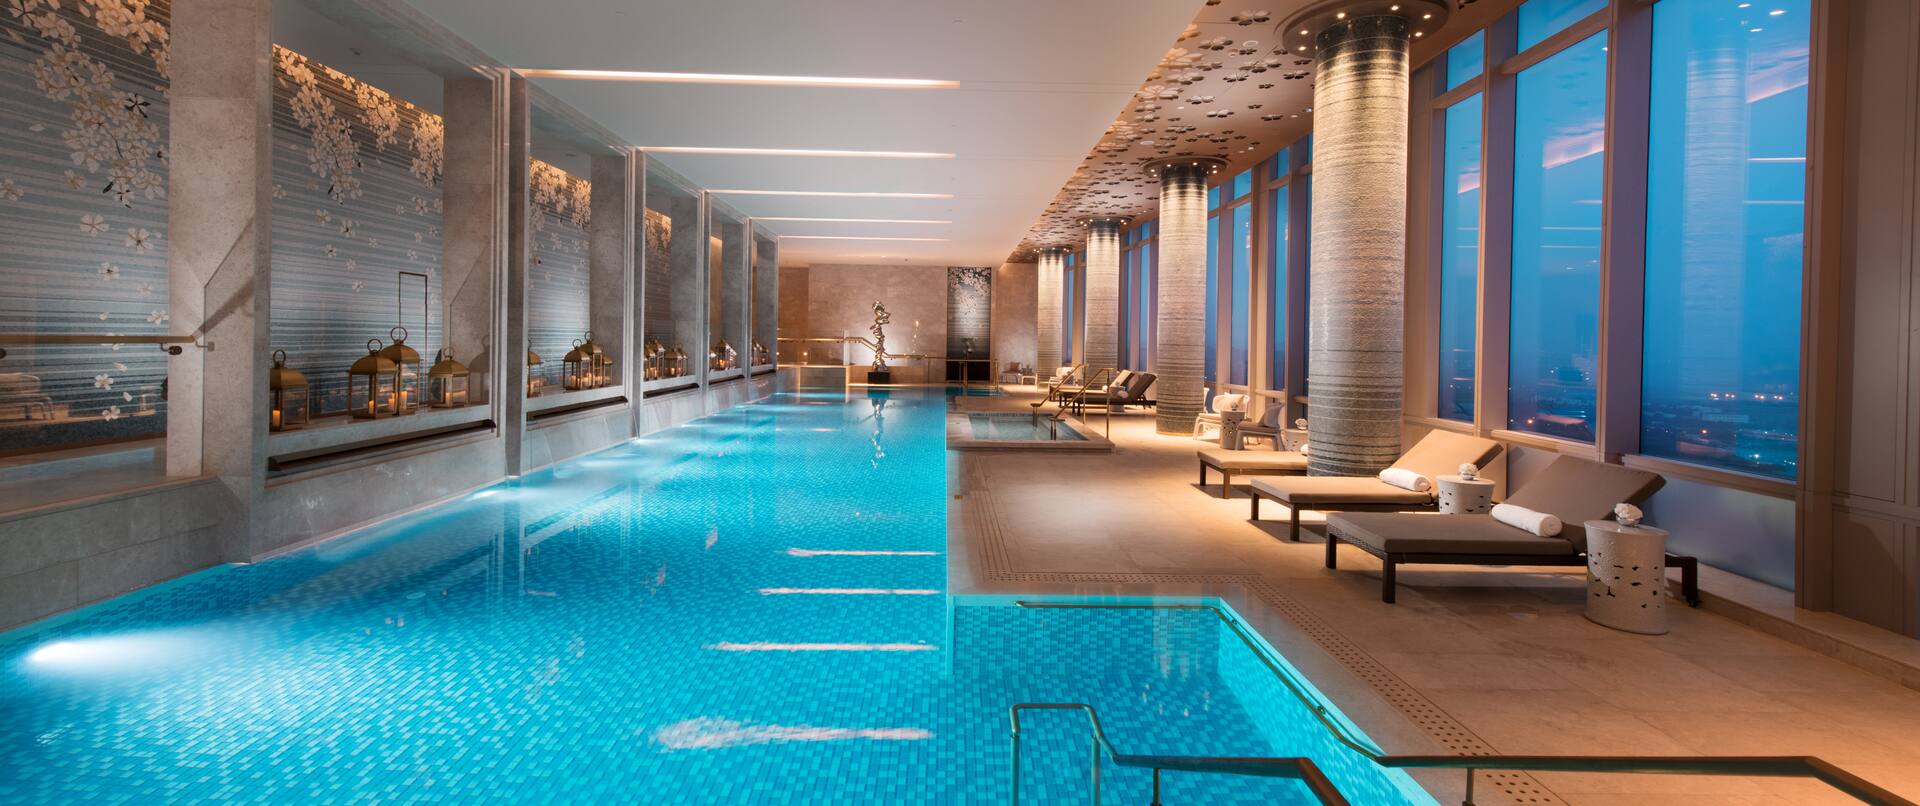 Lavish indoor pool with lounge chairs and floor-to-ceiling windows with outdoor view, lit up at night